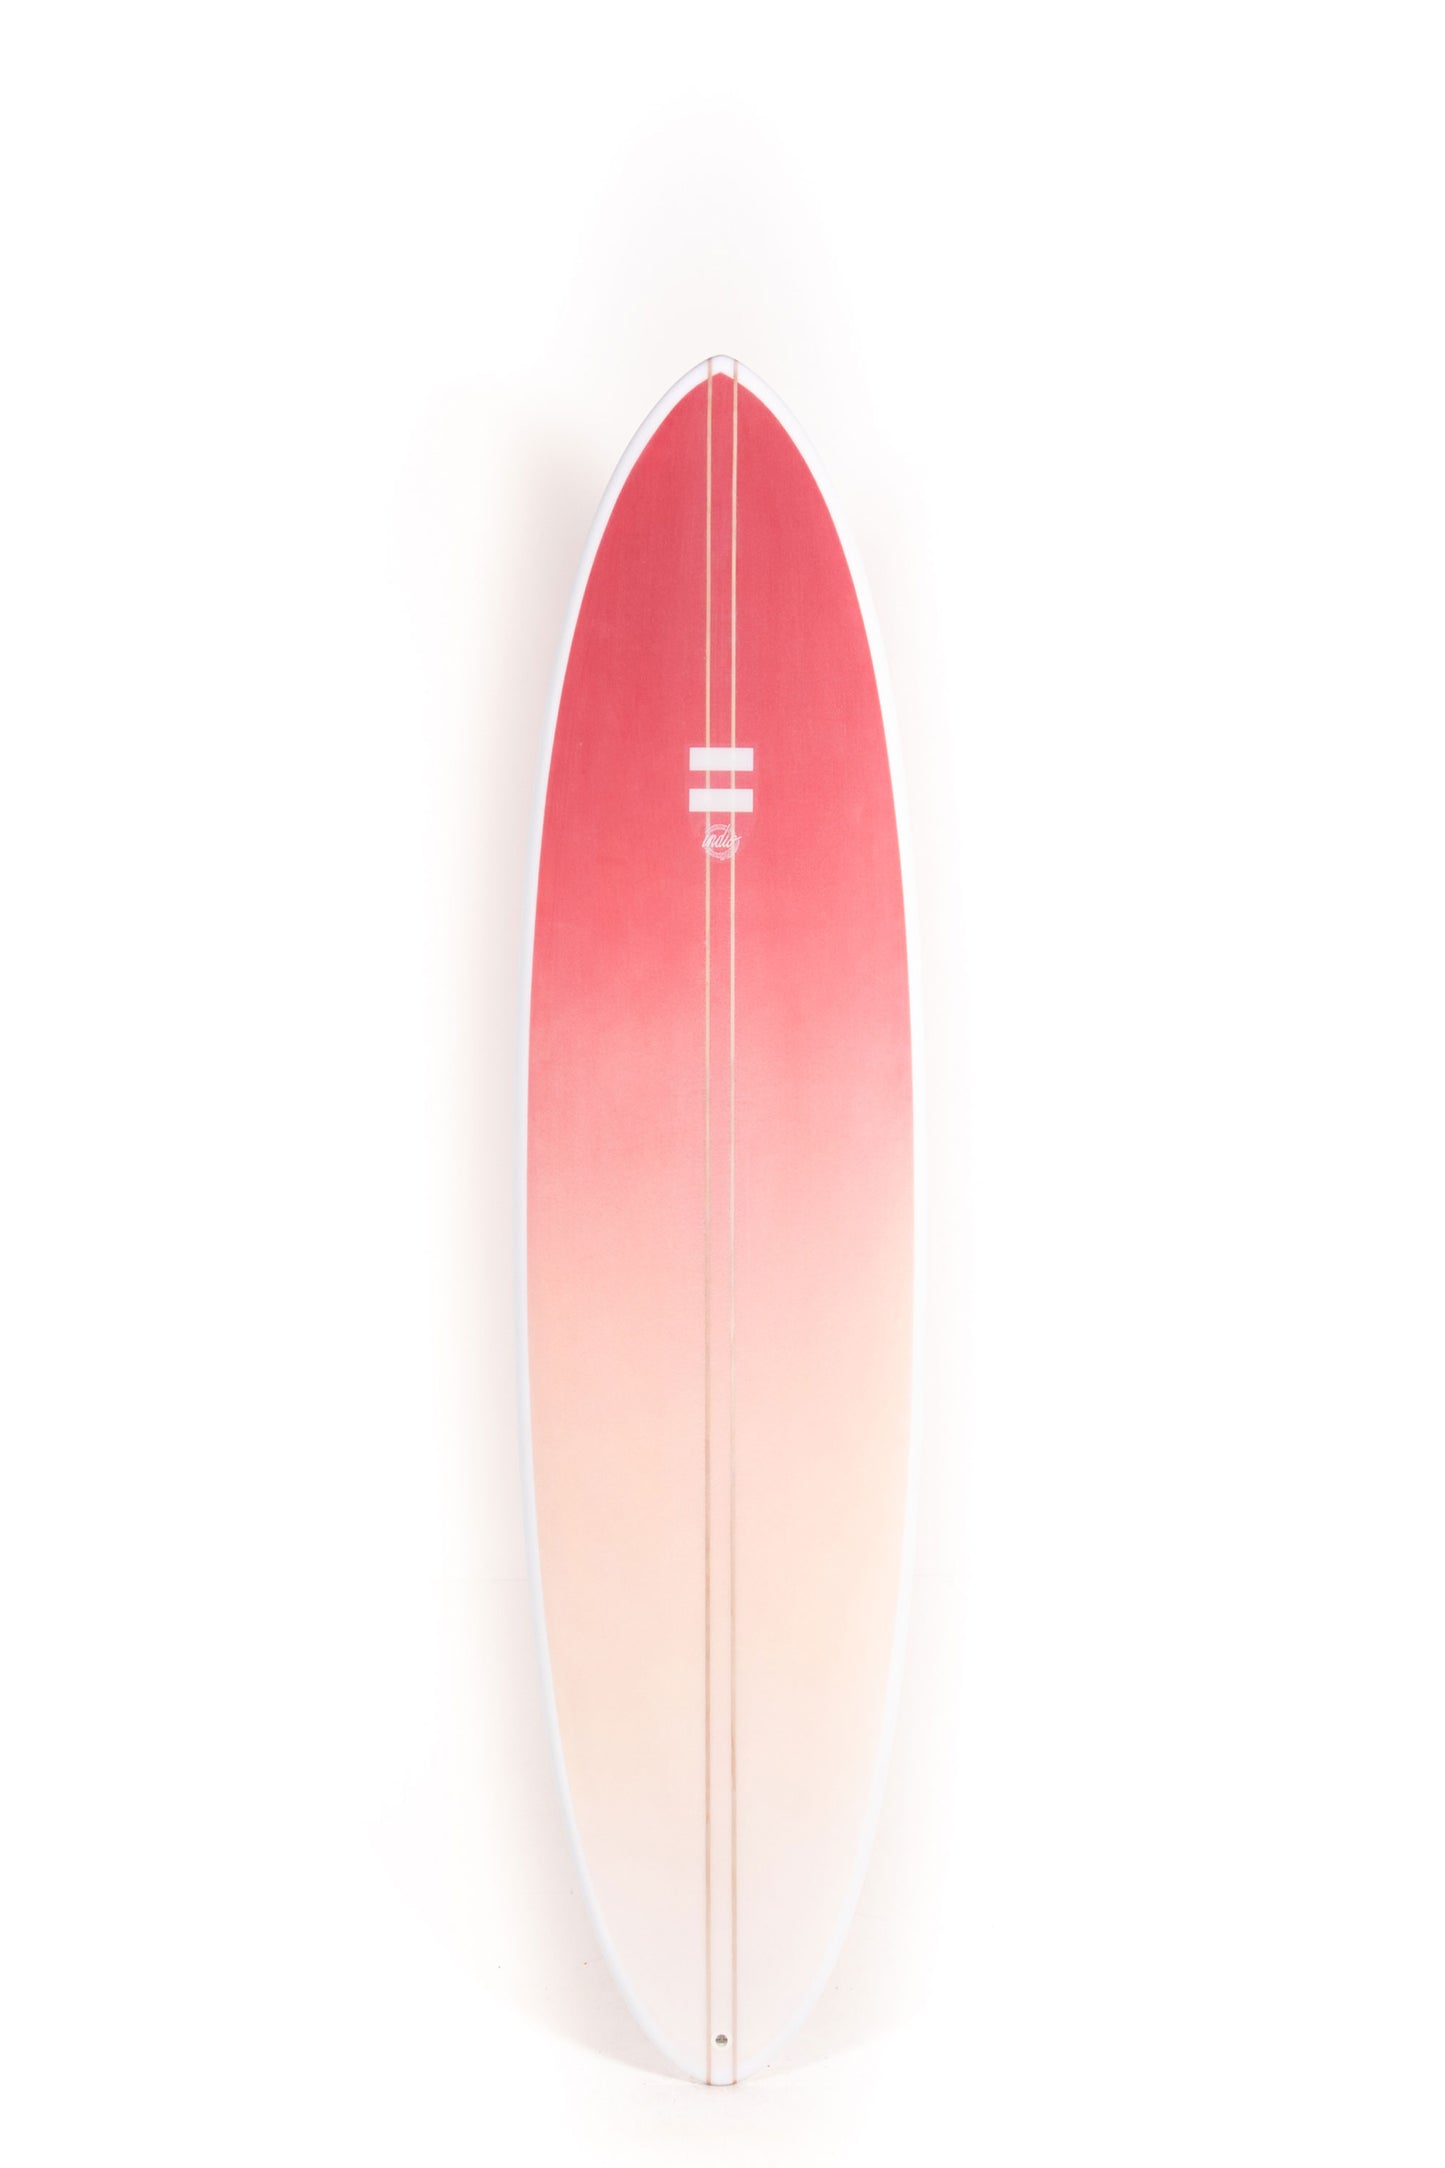 Pukas-Surf-Shop-Indio-Surfboards-The-Egg-red-7_6